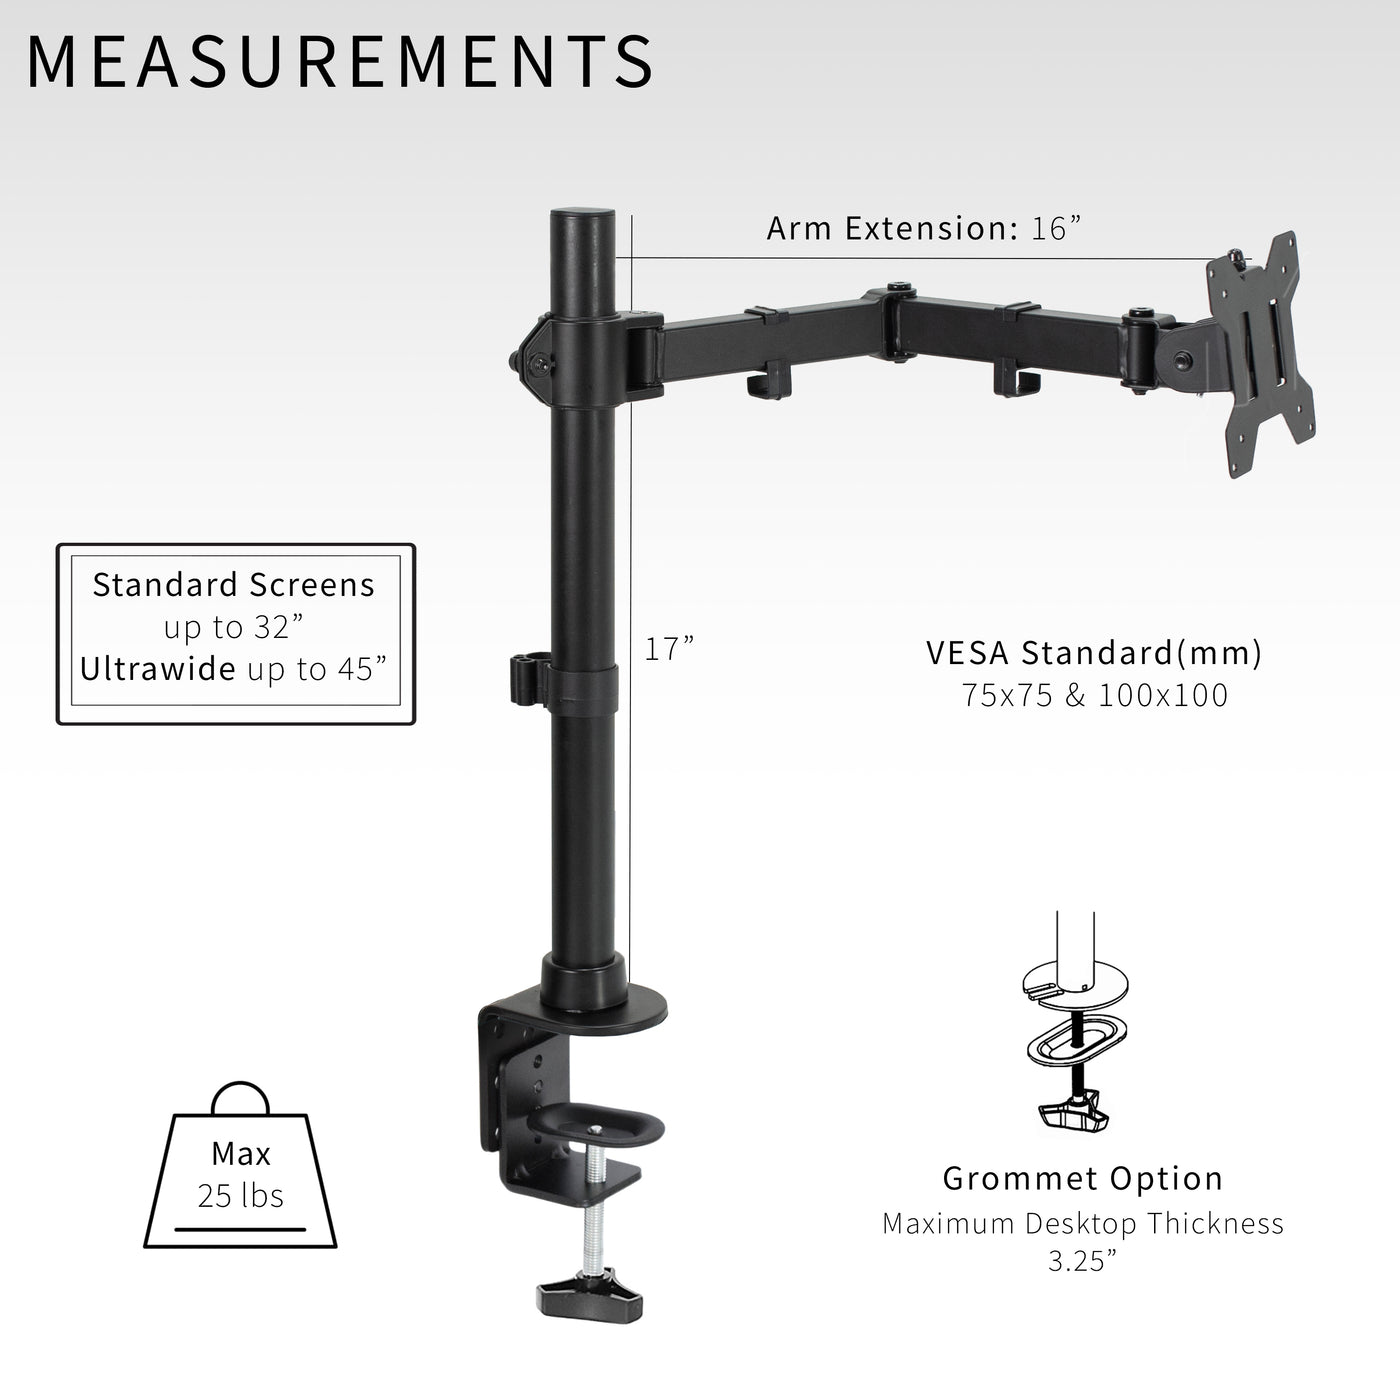 Single Ultrawide Monitor Desk Mount elevates ultra wide monitors to a comfortable viewing angle.